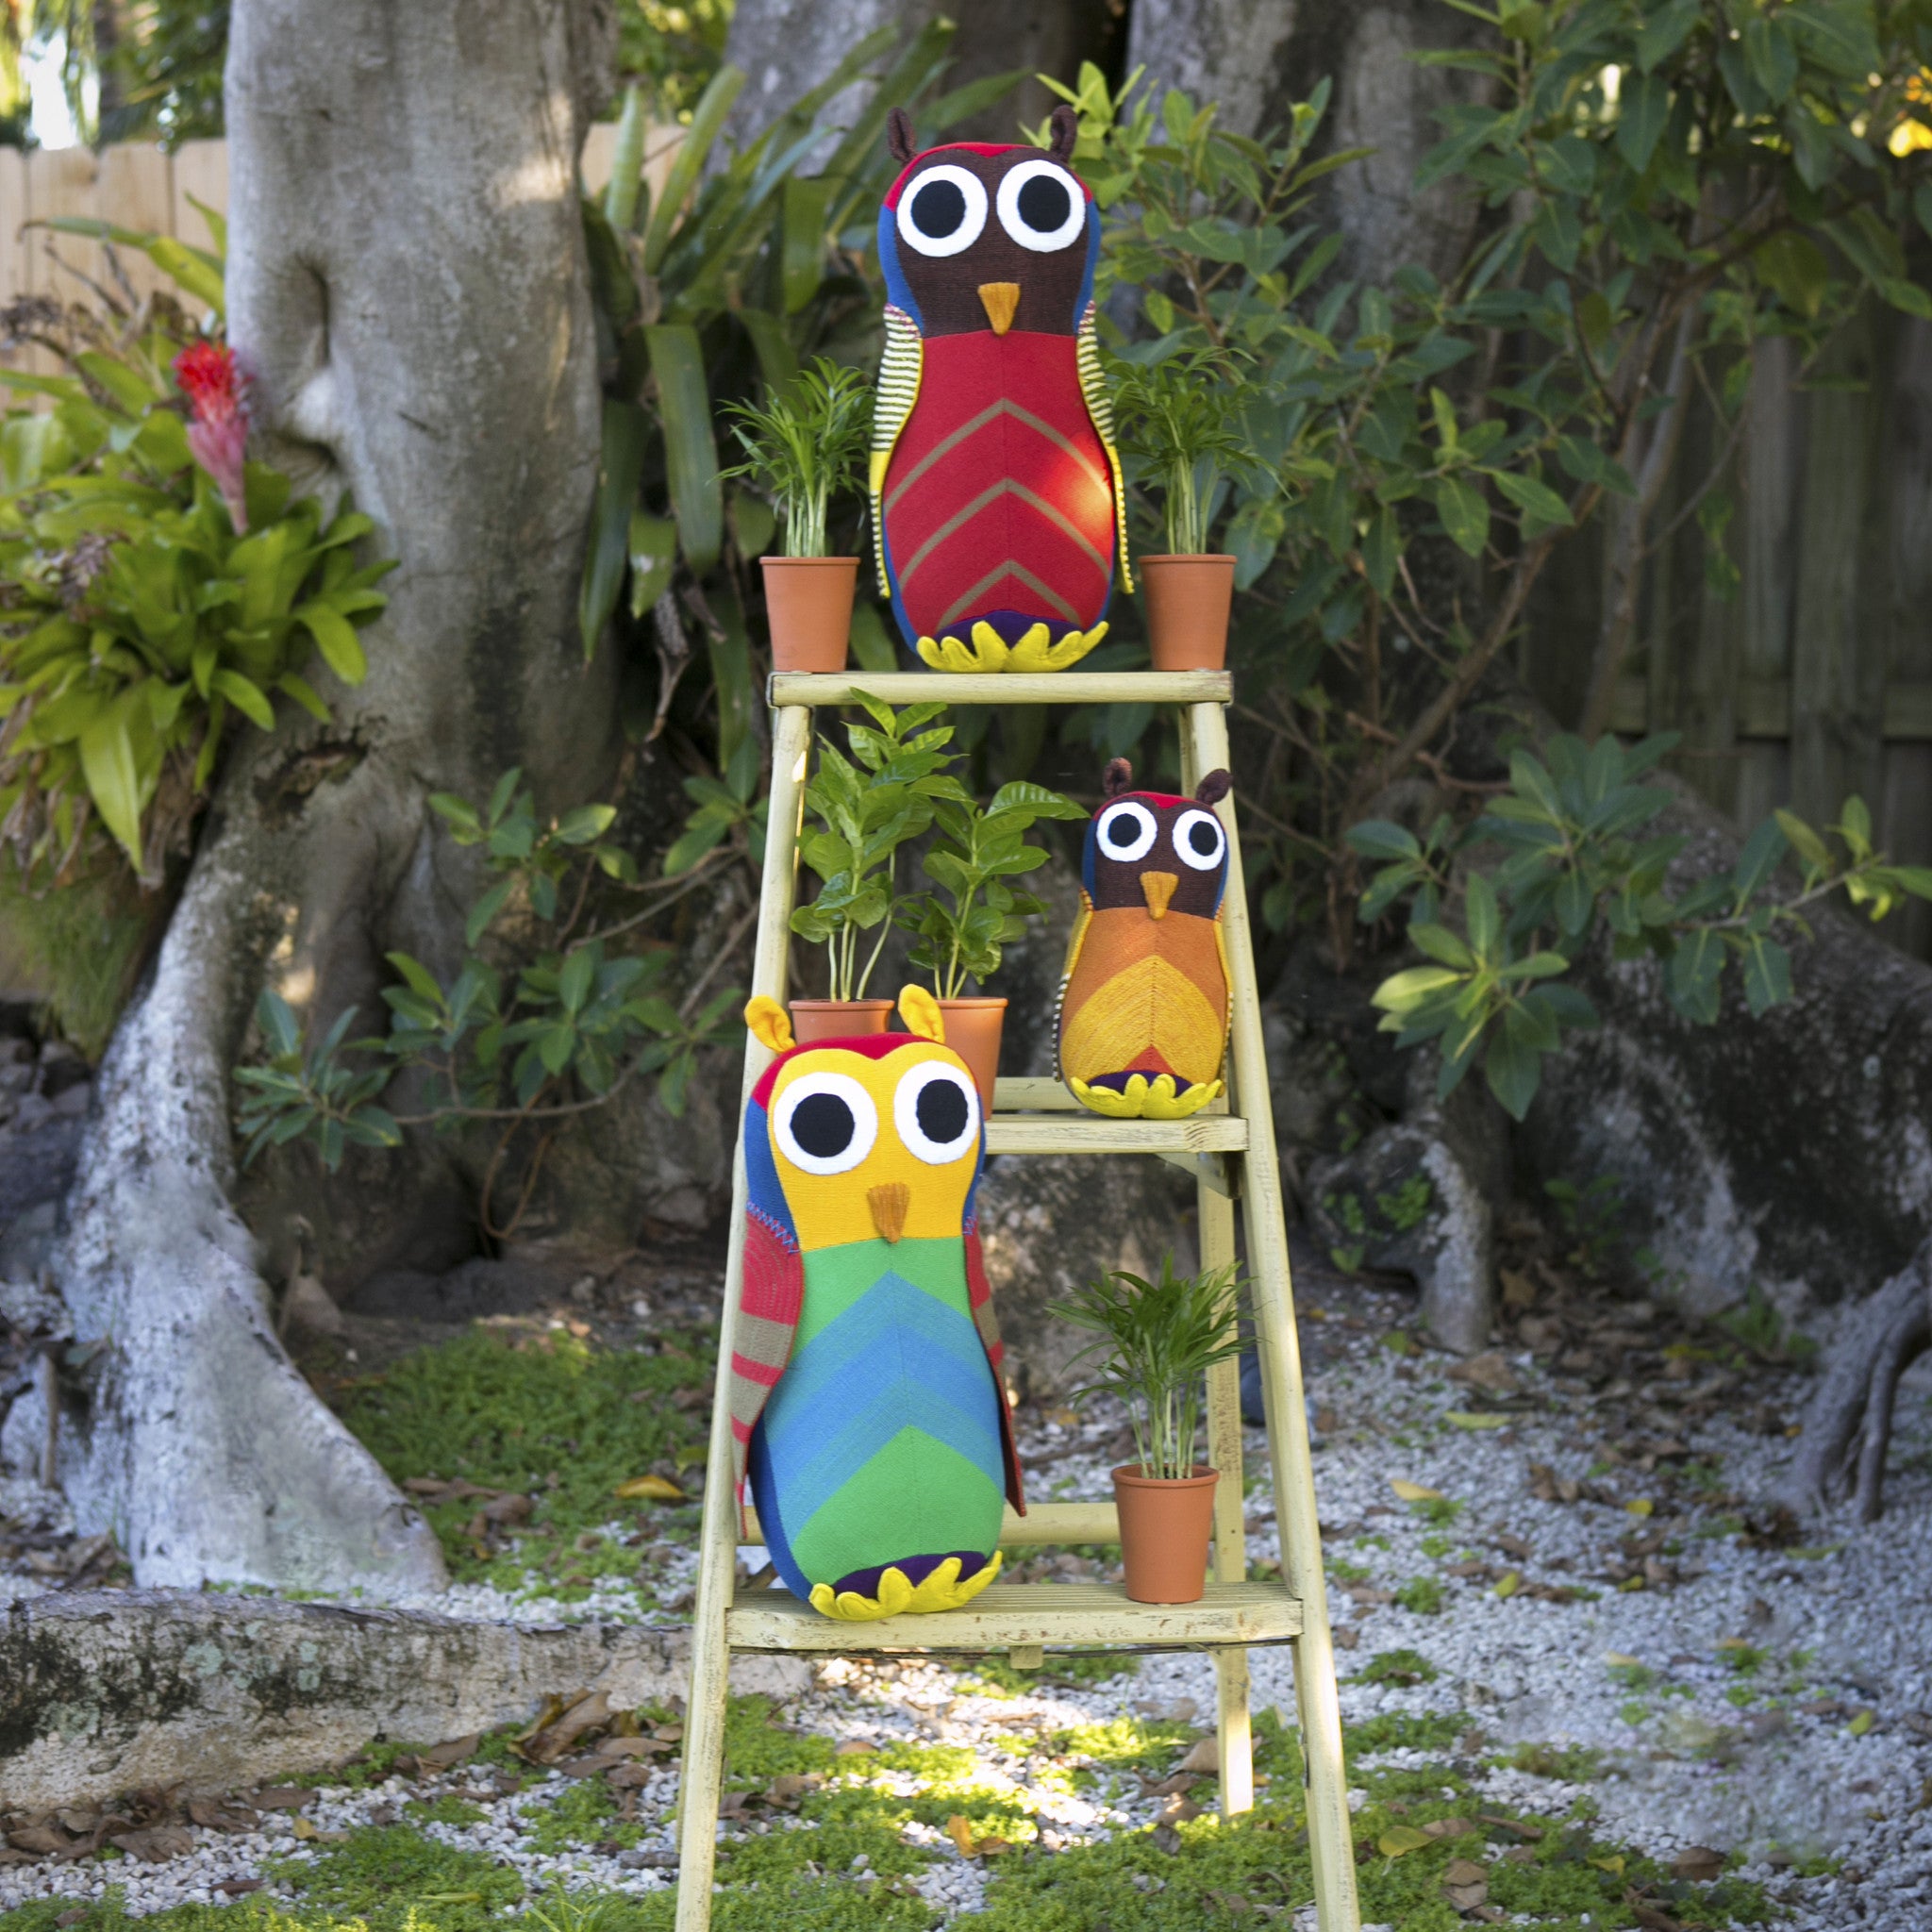 The Owl family is ready to make a hoot! (Harold & Harvey shown in large size and Homer in small size)